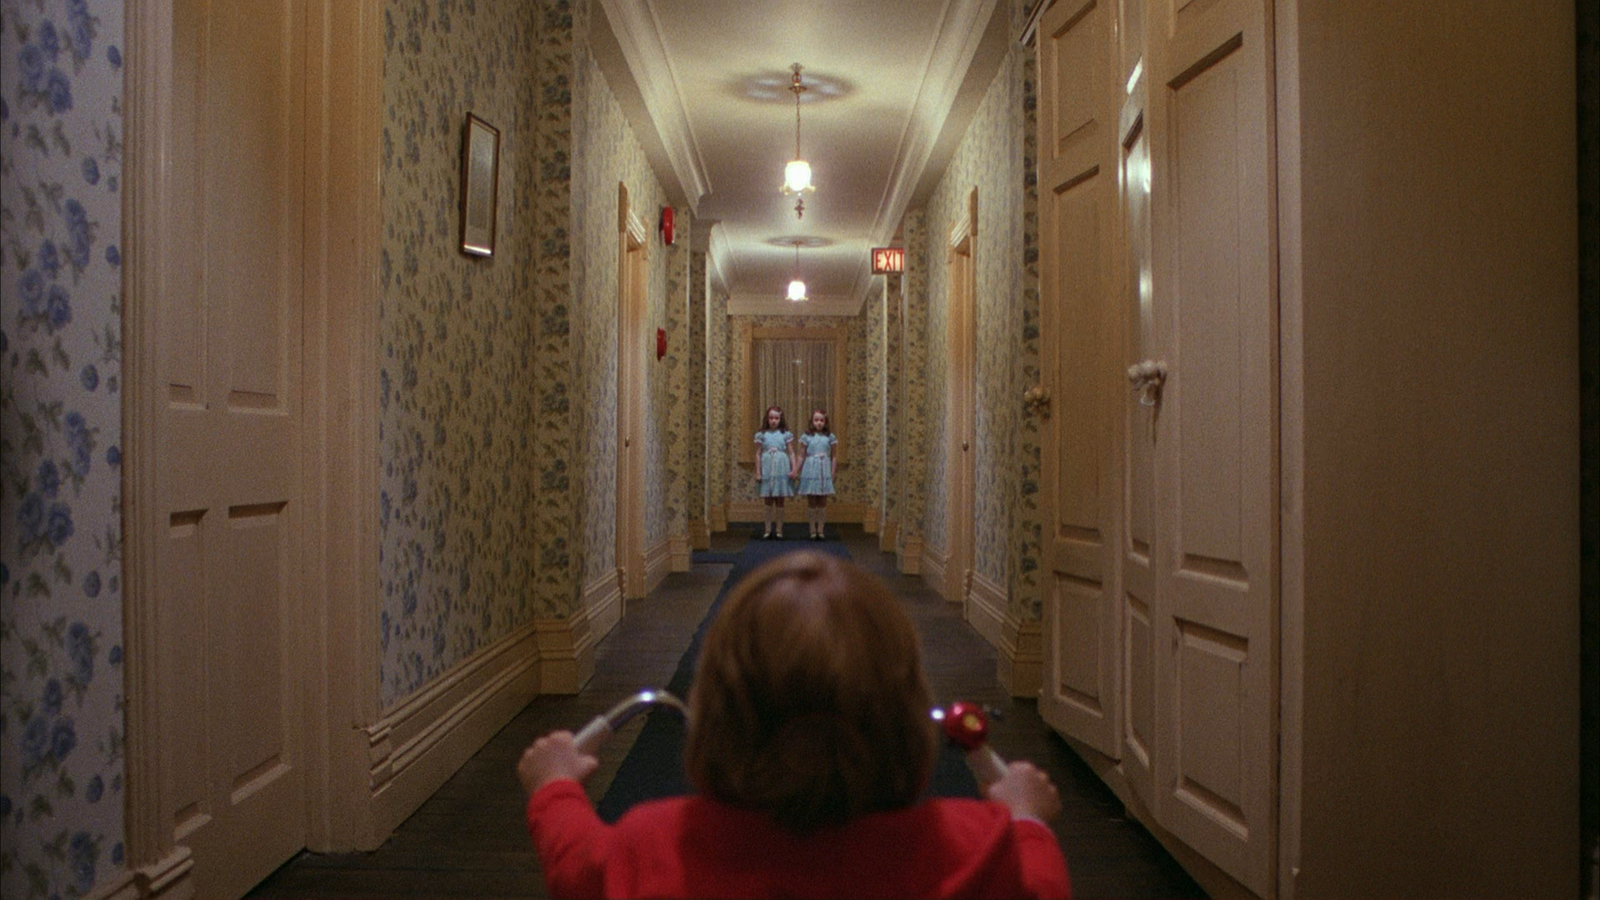 Remember this scene? The Shining, Timberline Lodge, OR